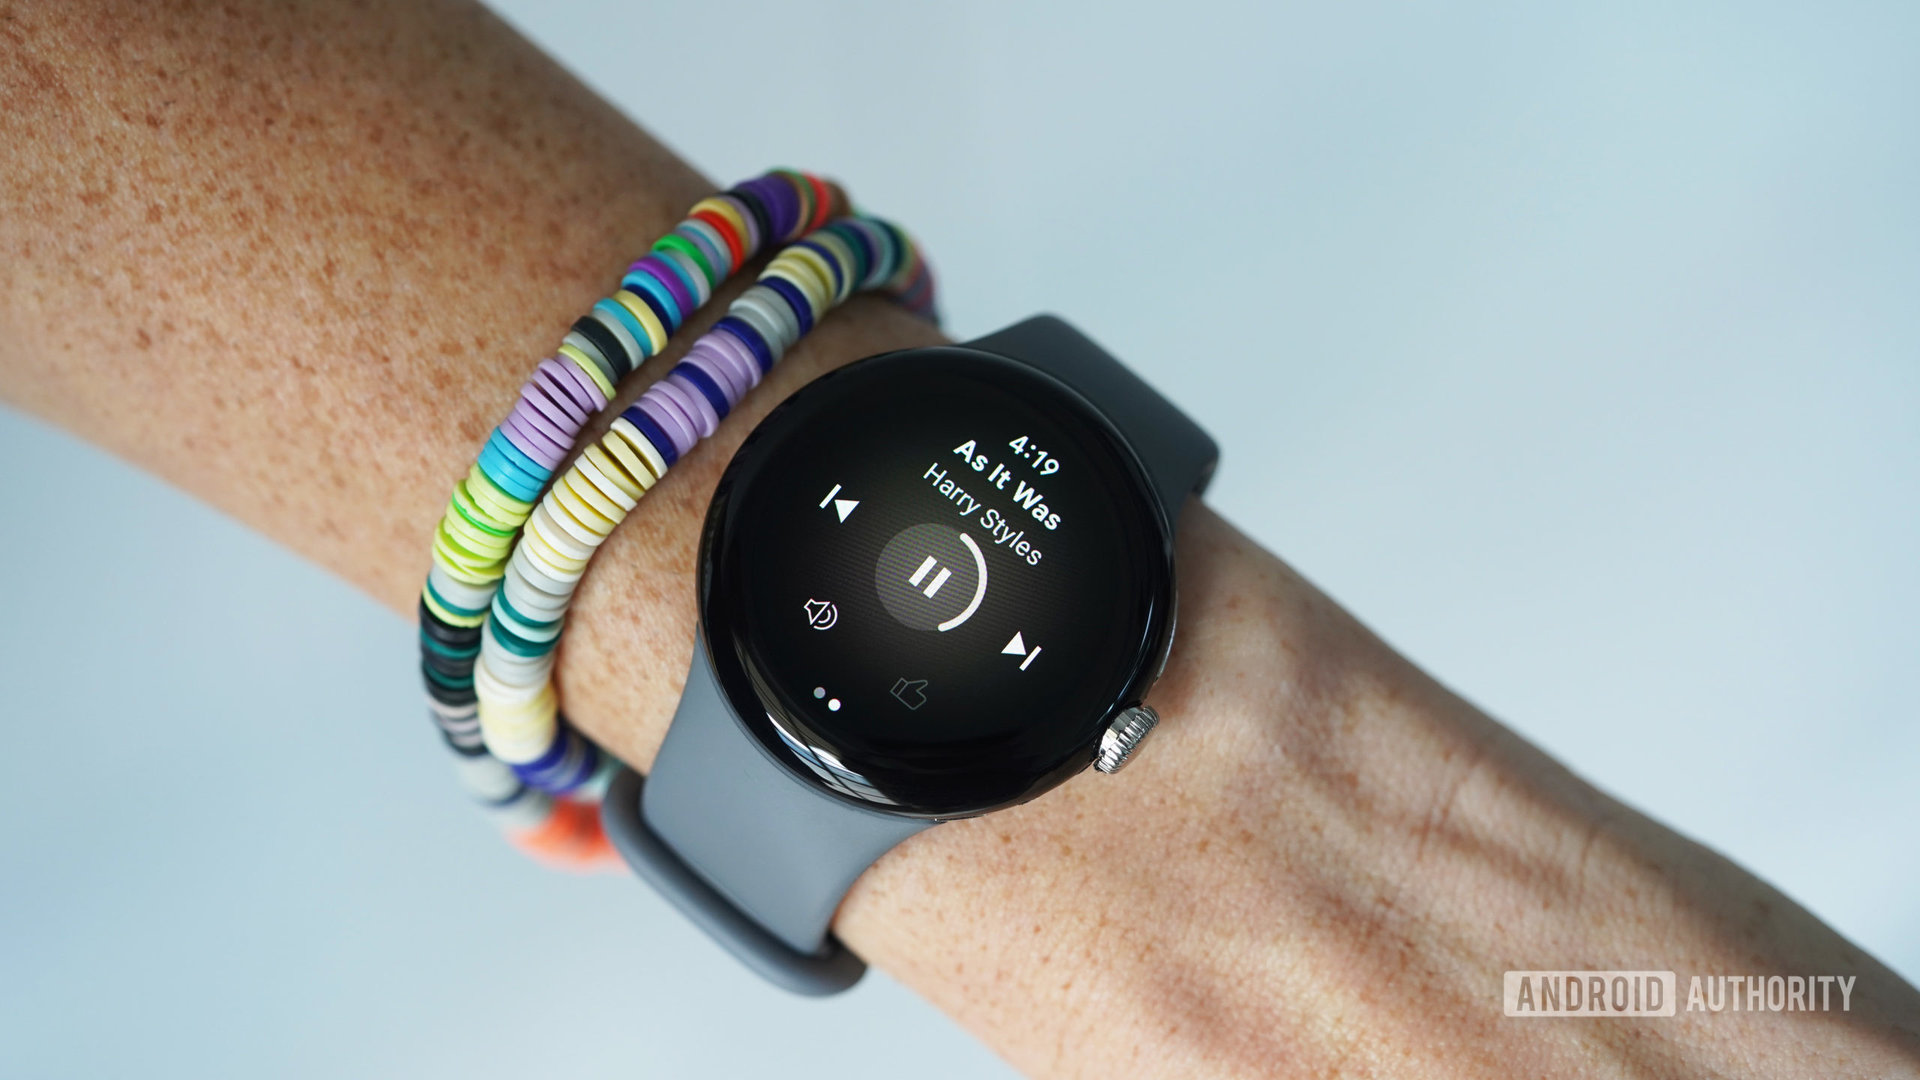 A Google Pixel Watch displays a user's current music selection.